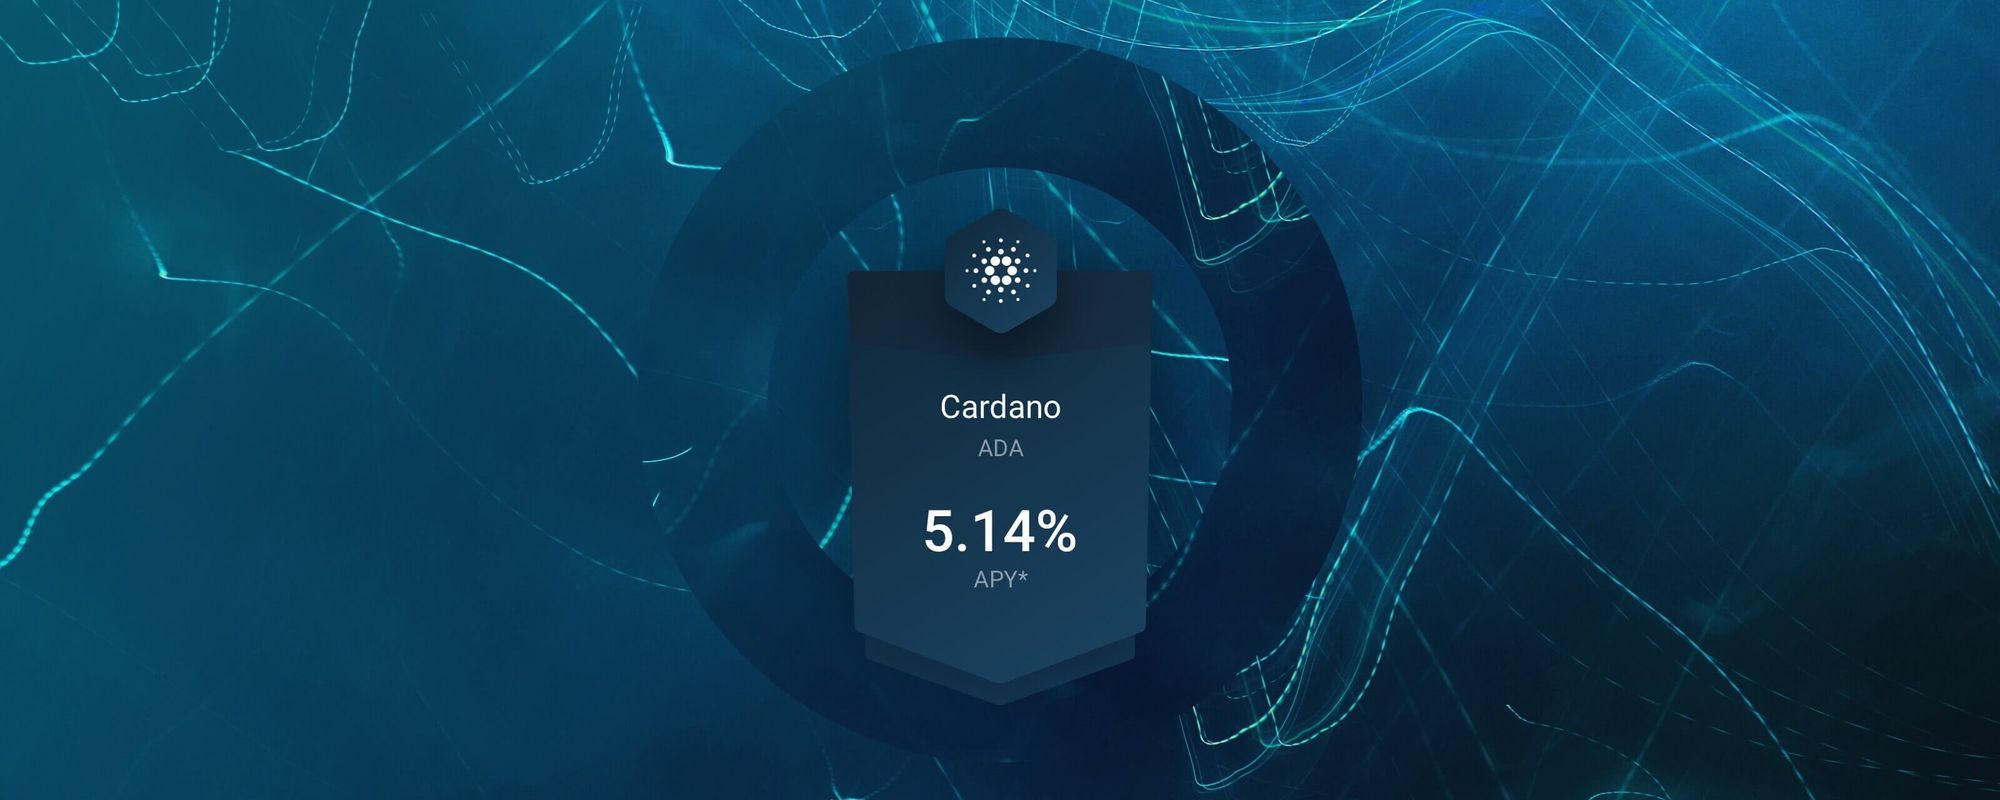 Cardano Staking: How to Stake Cardano in Seconds